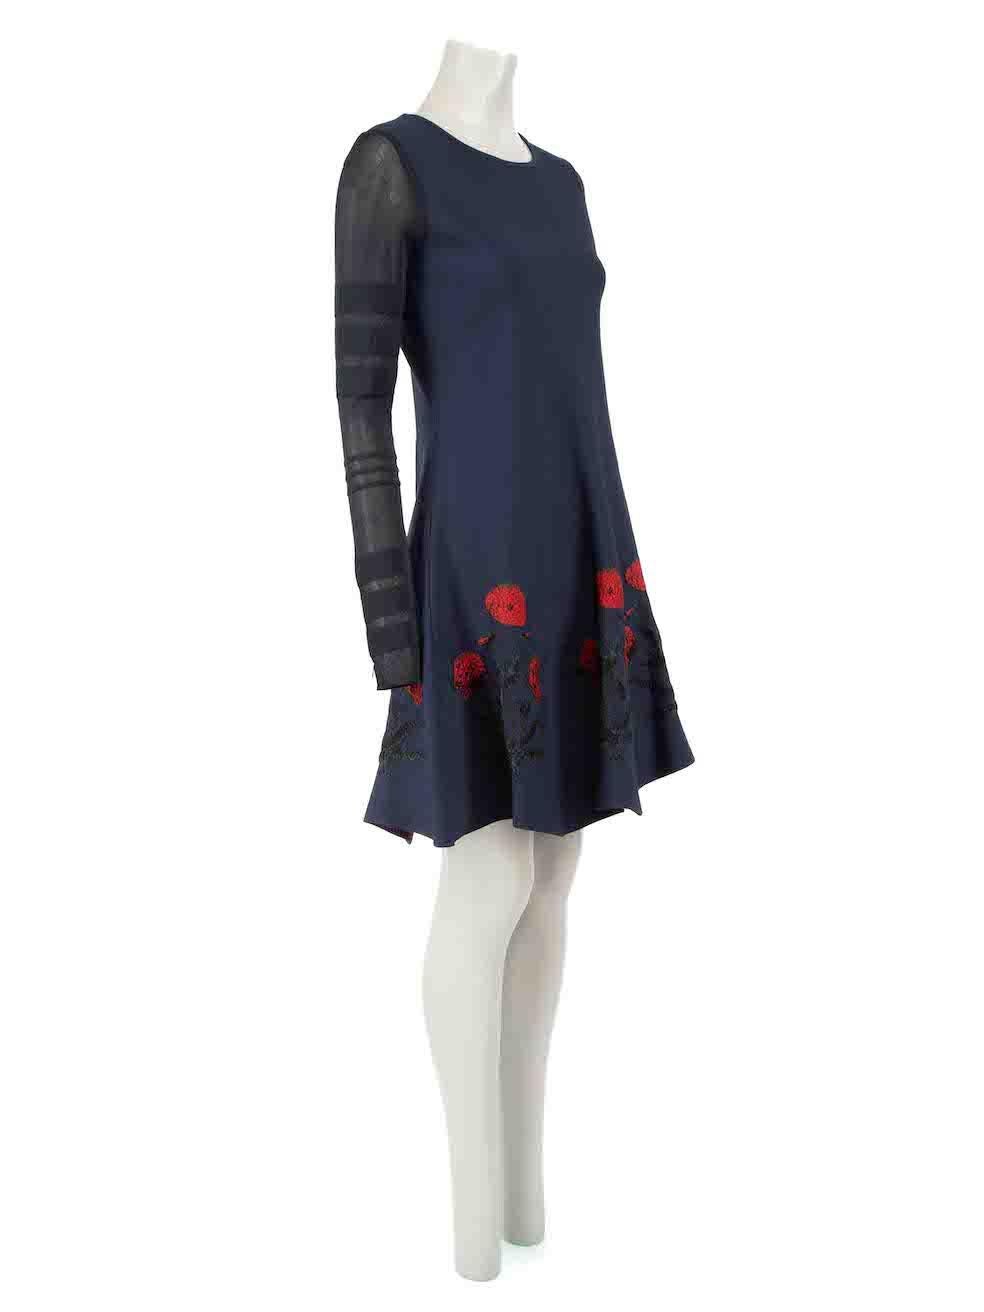 CONDITION is Never worn, with tags. No visible wear to dress is evident on this new Oscar de la Renta designer resale item, however there are some very small holes on left sleeve due to poor storage.
 
 Details
 Navy
 Viscose
 Knee length dress
